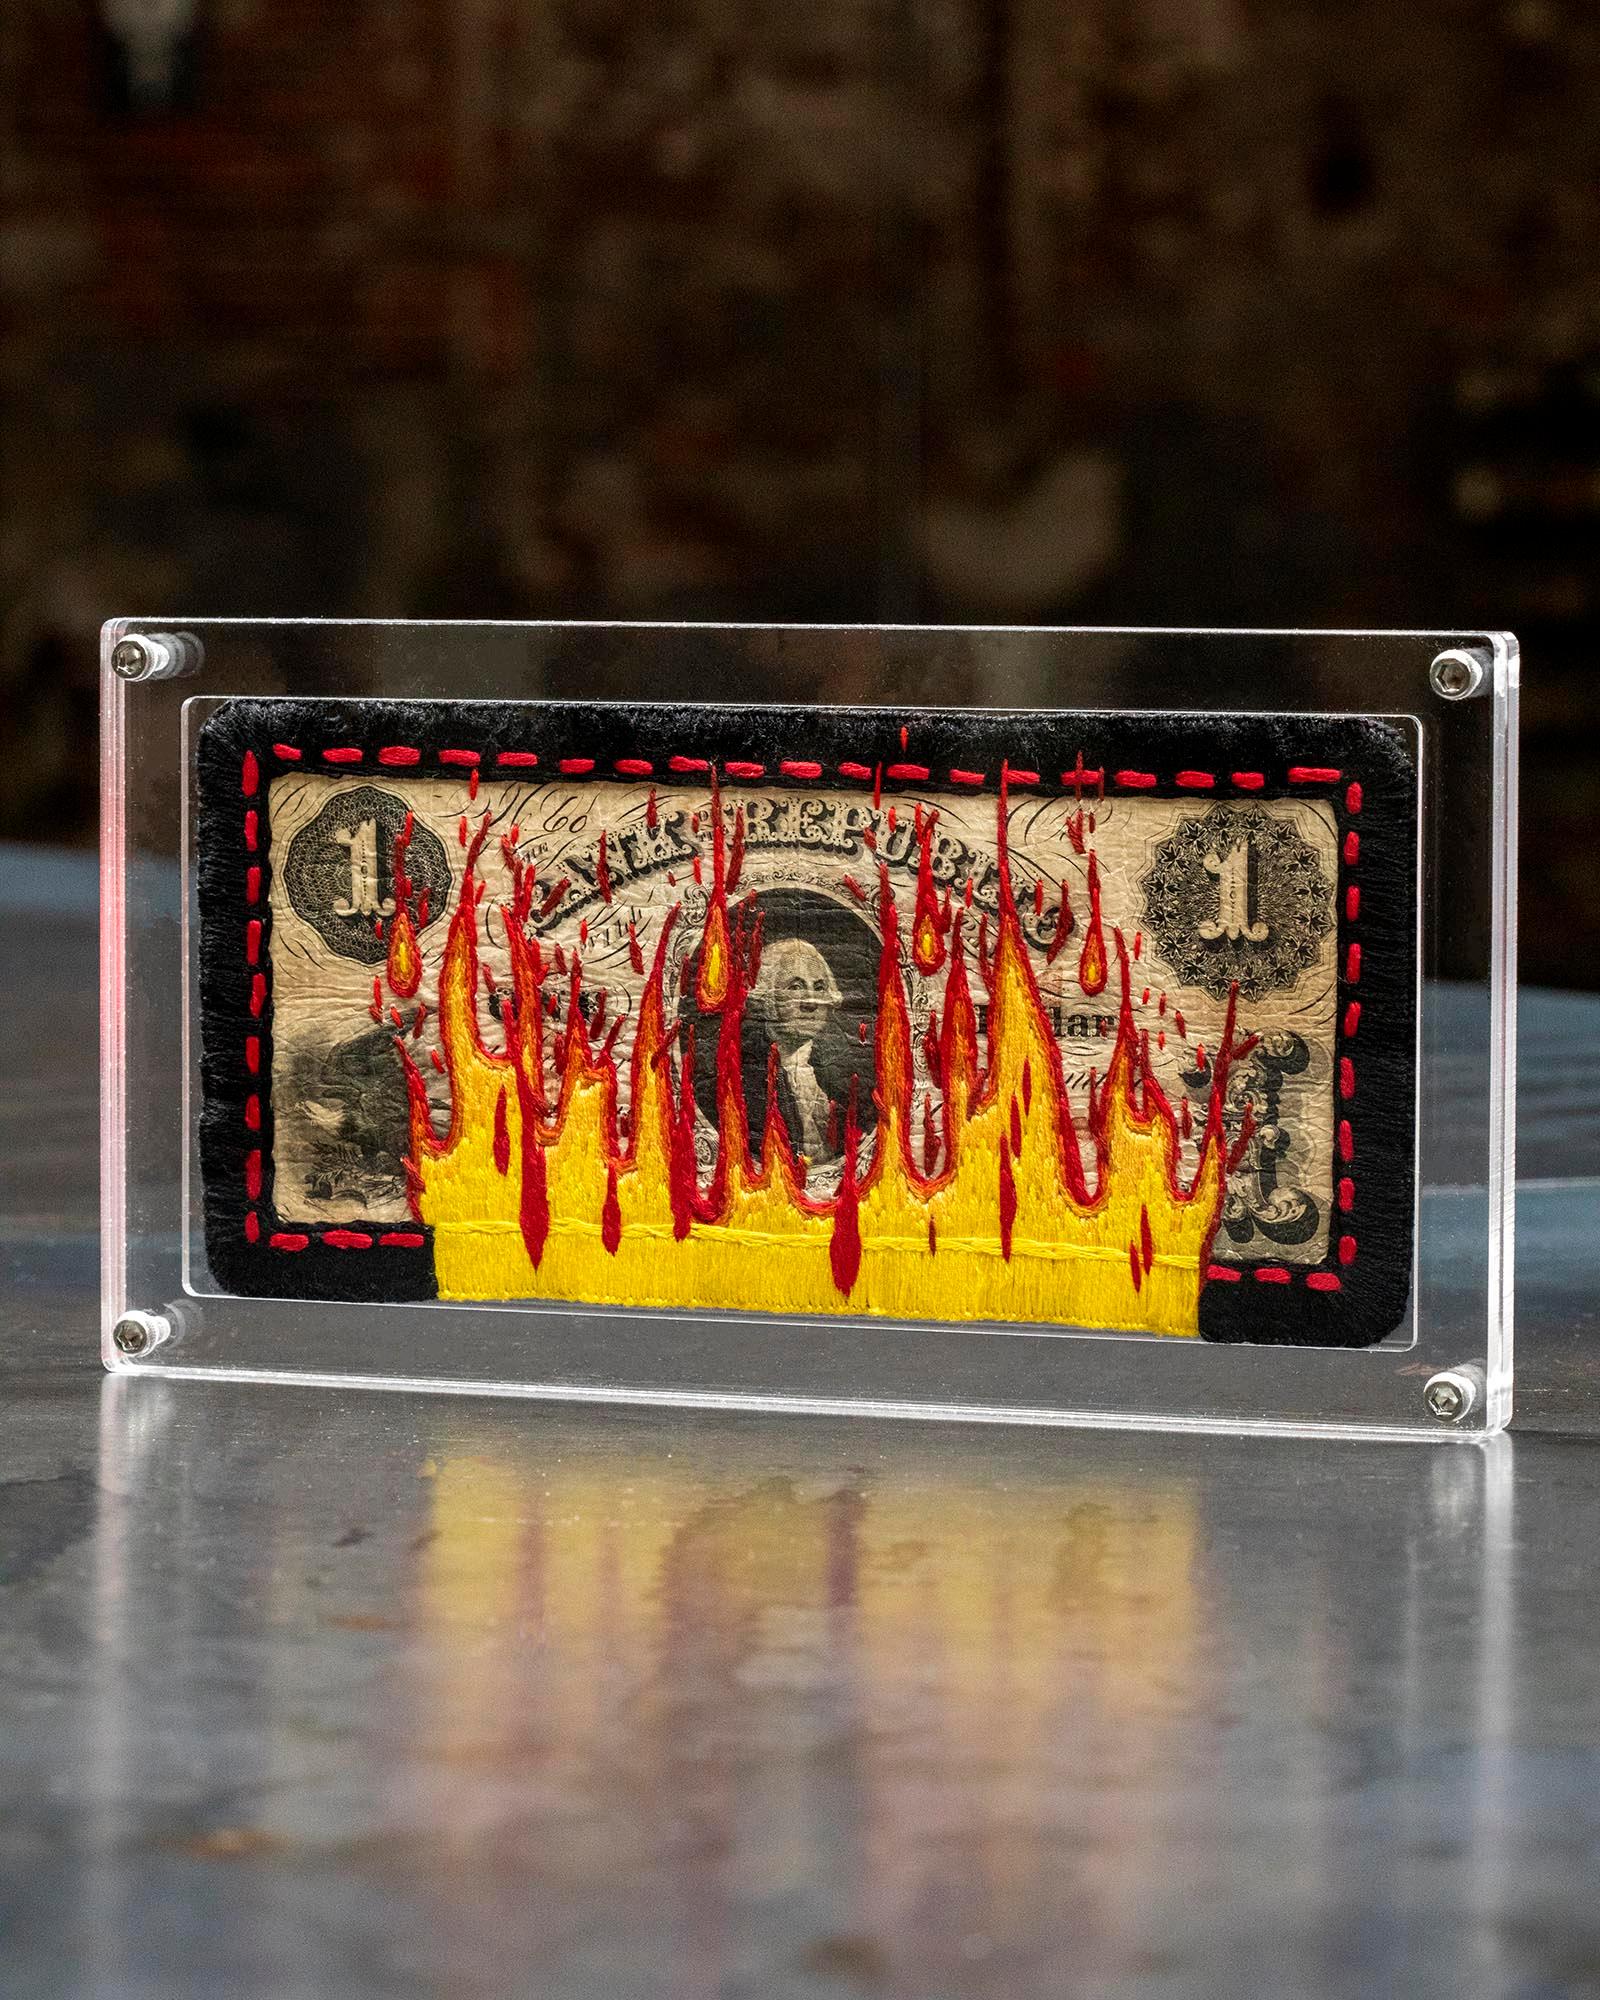 Obsolete: Washington Fire - Contemporary Mixed Media Art by Stacey Lee Webber